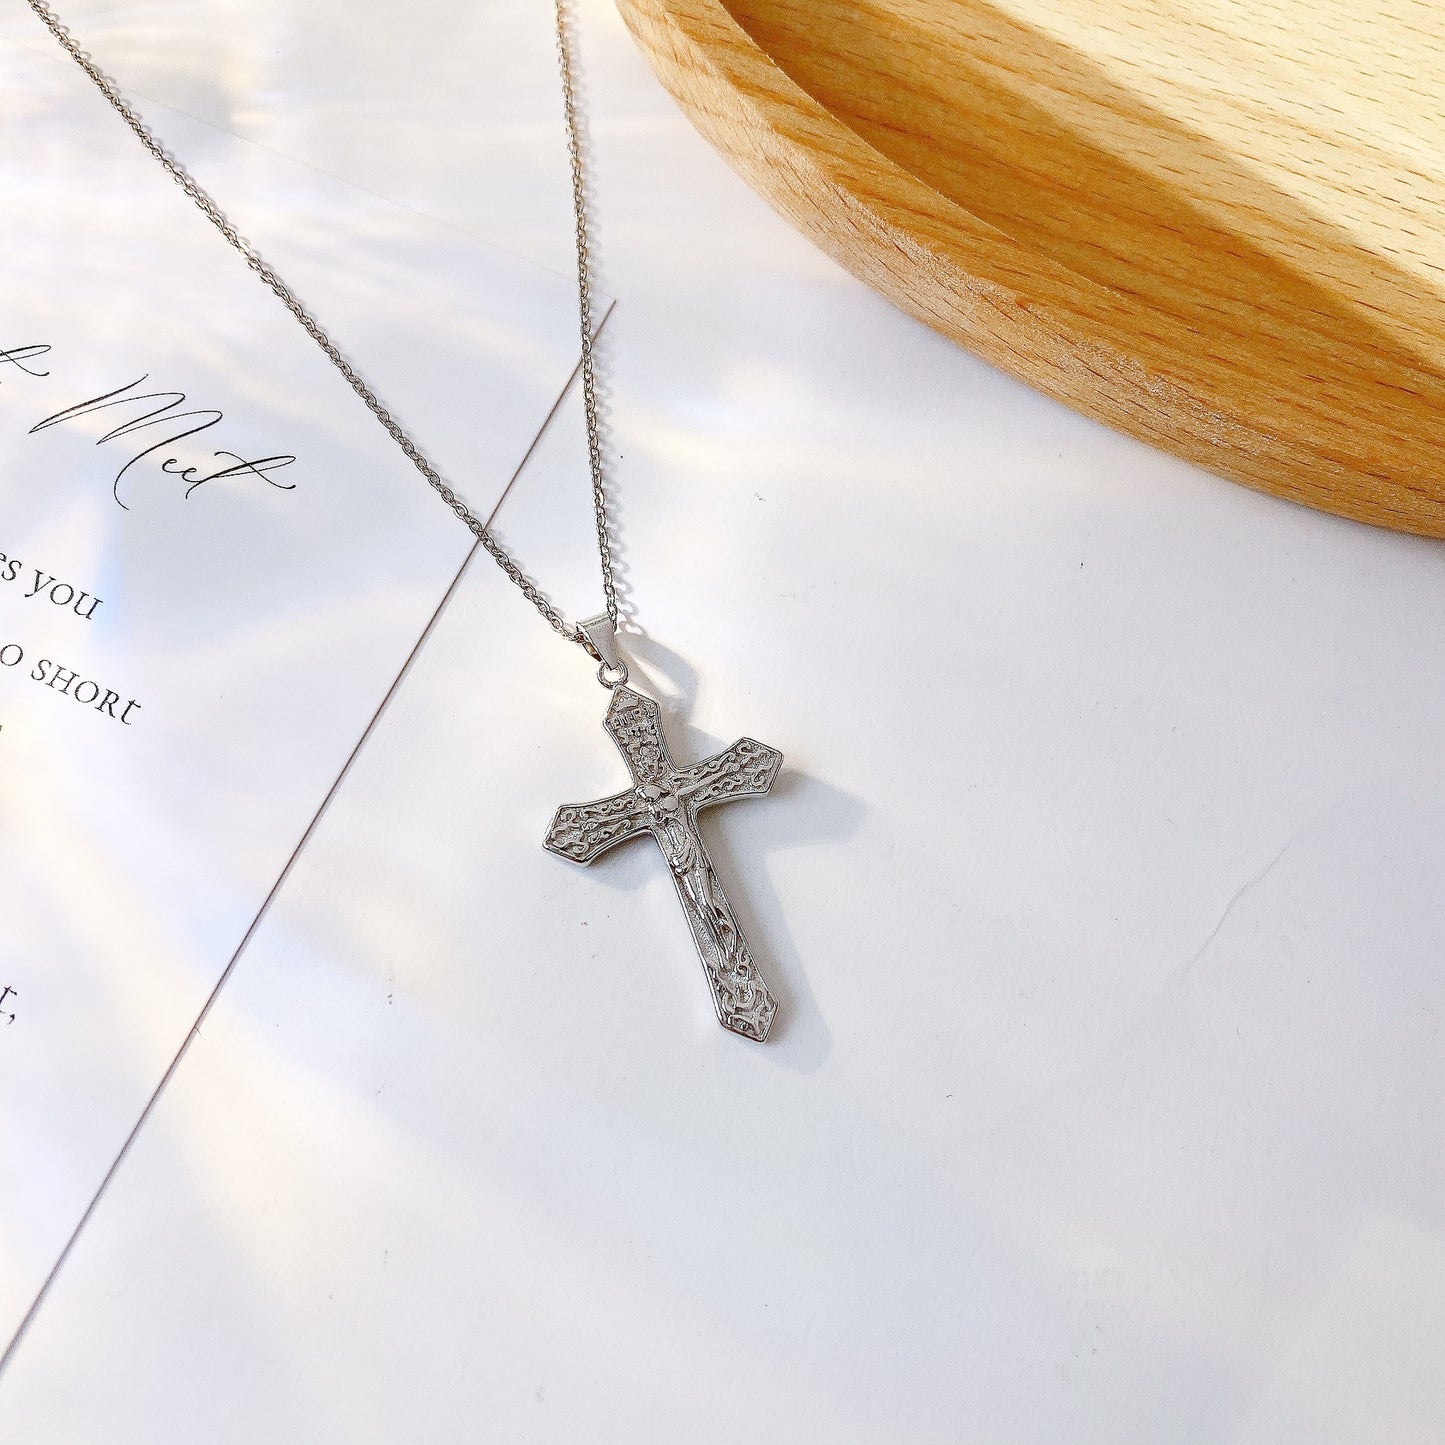 Jesus Cross with Decorative Pattern Pendant Silver Necklace for Women